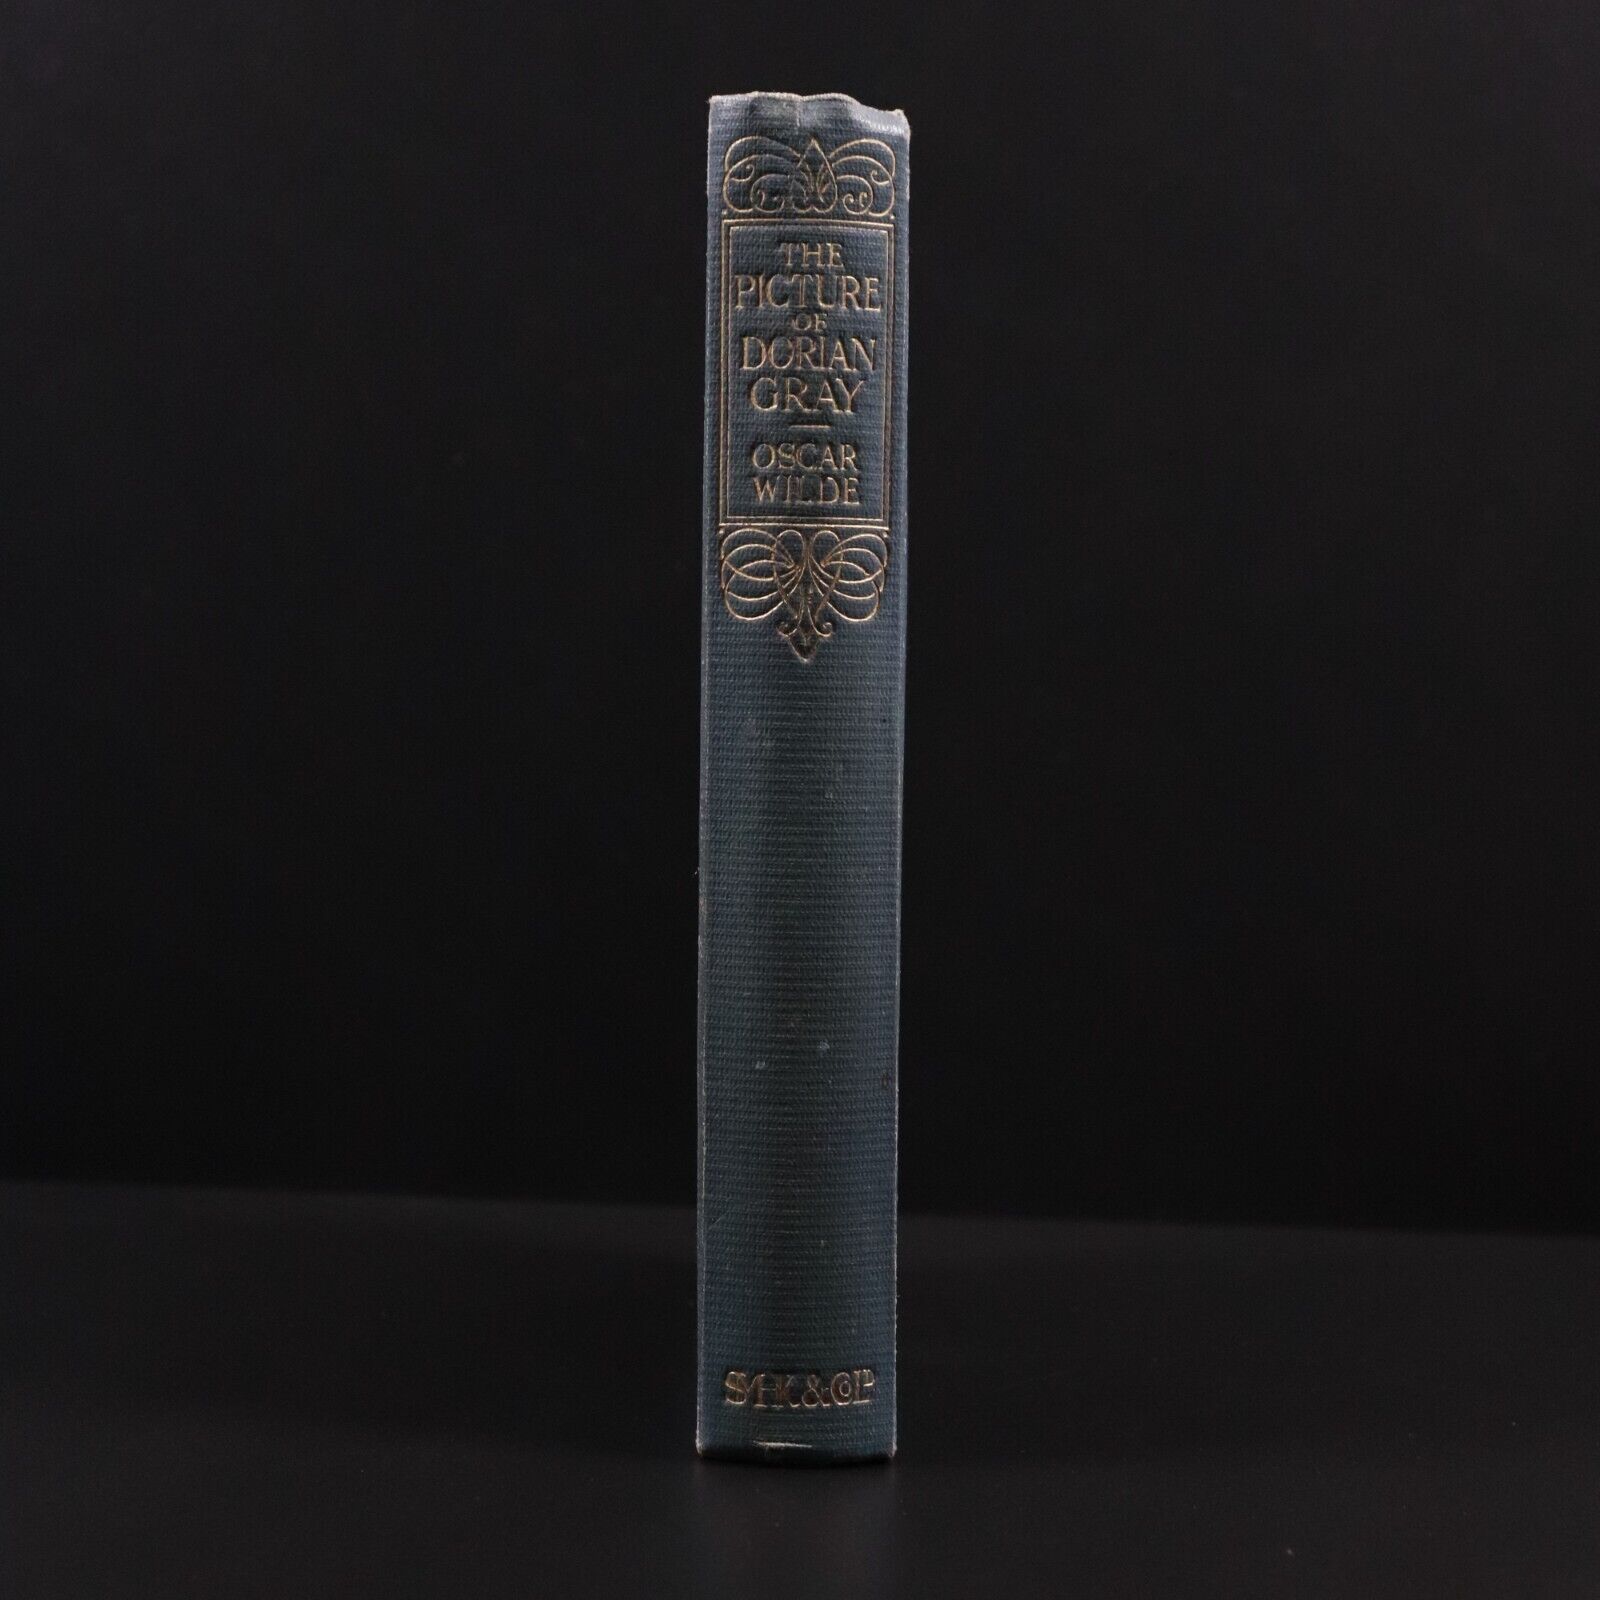 c1910 The Picture Of Dorian Gray by Oscar Wilde Antique Classic Literature Book